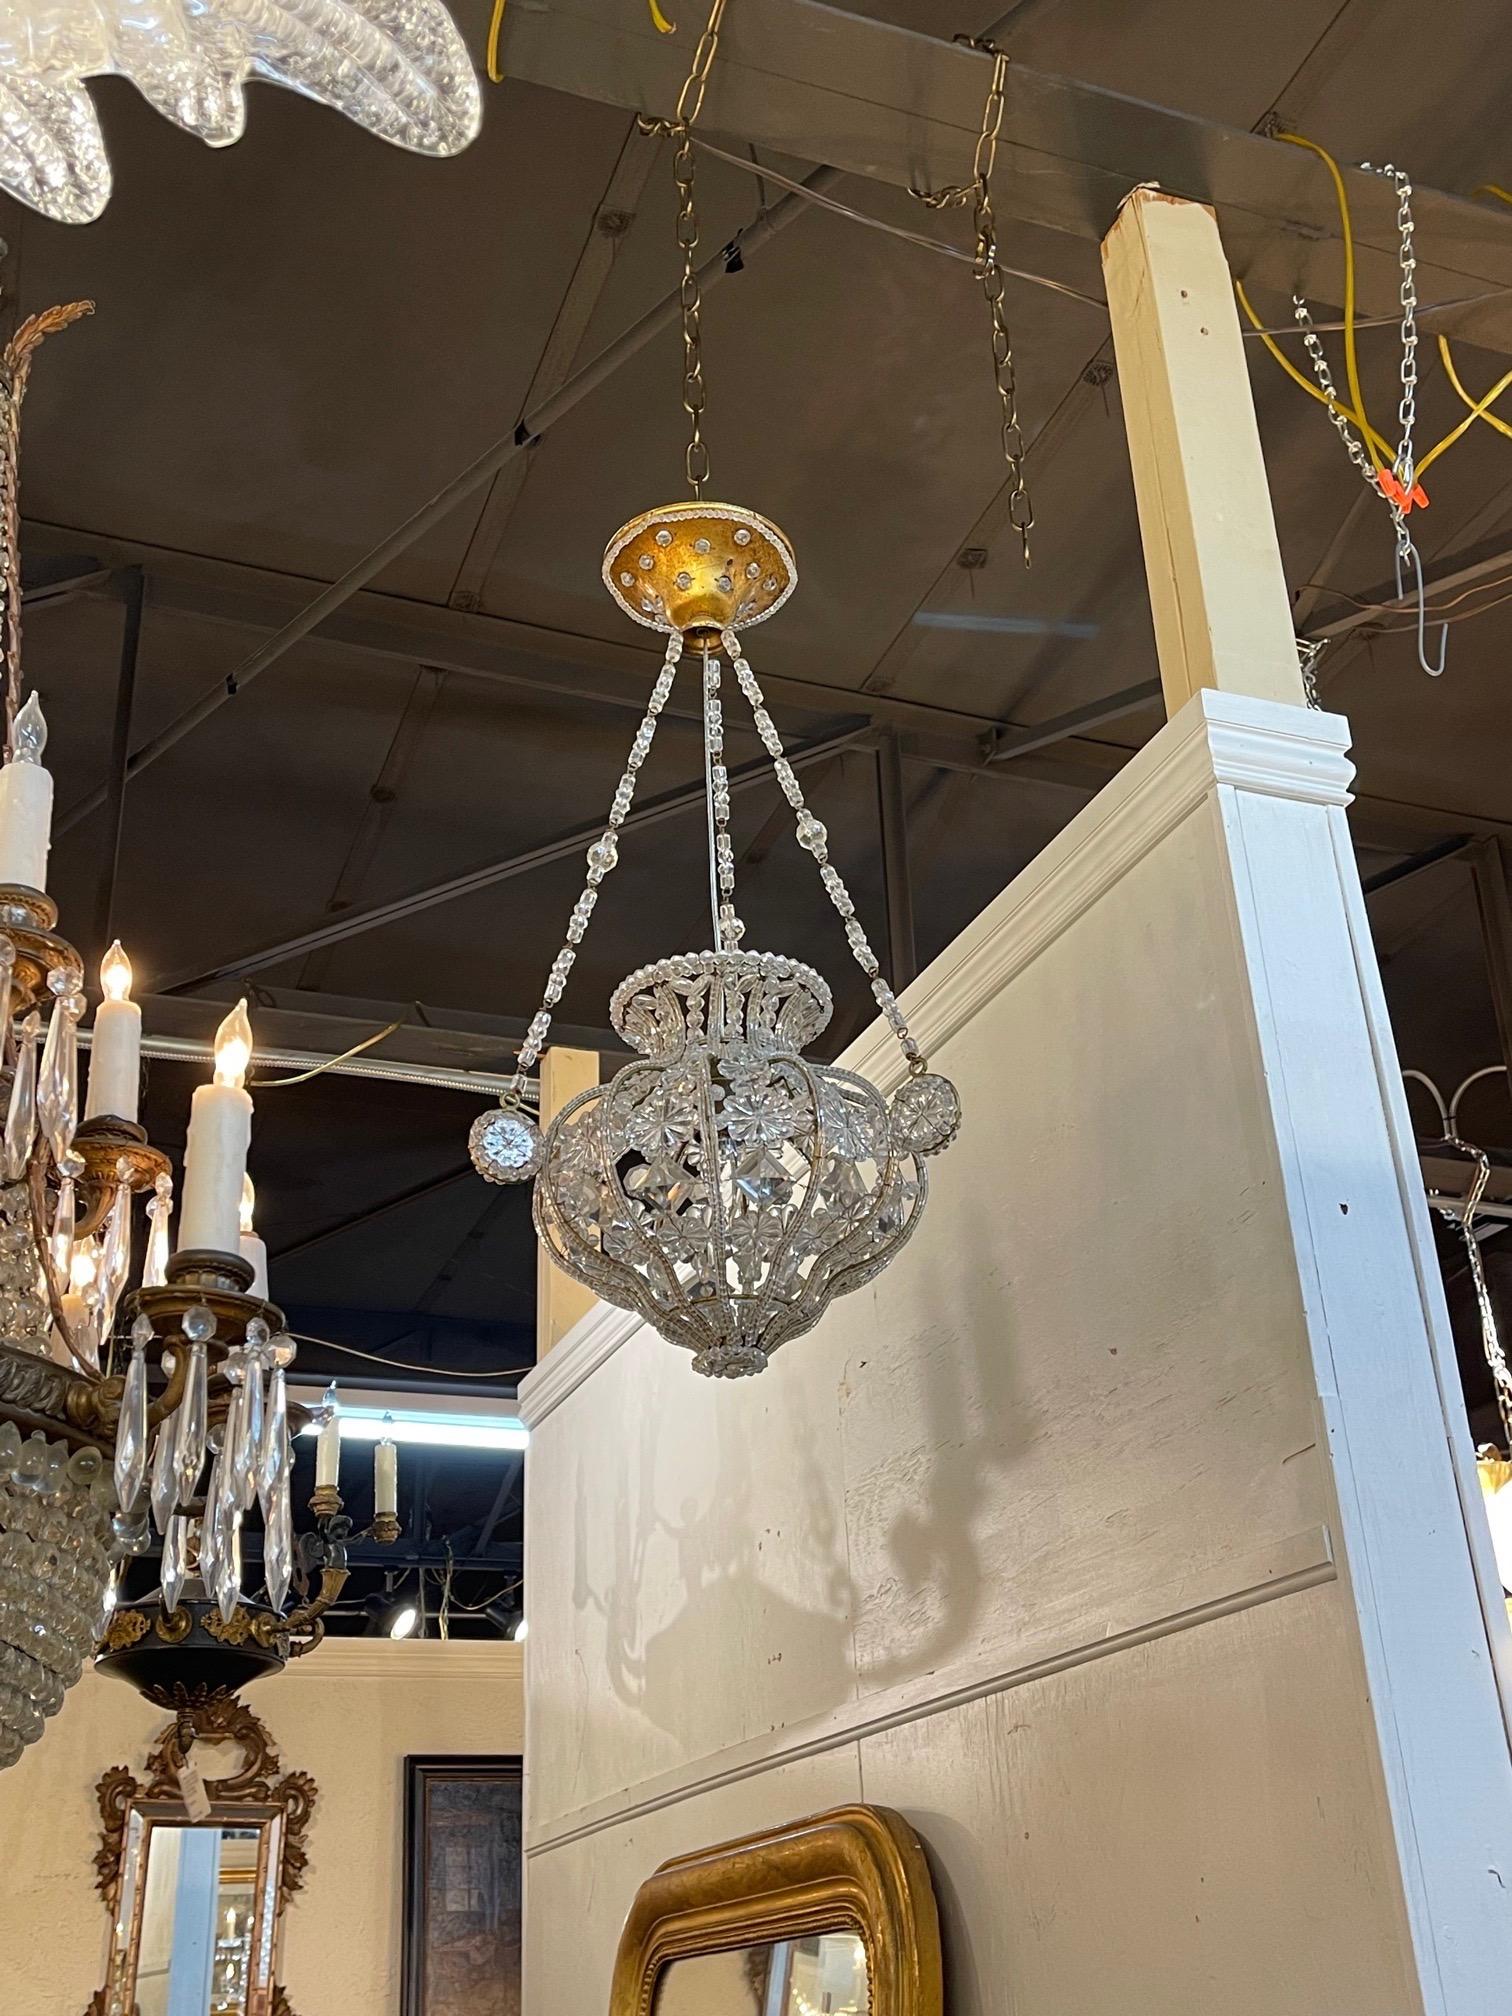 Lovely early 20th century Italian beaded crystal single light pendant. Very nice scale and shape and covered in crystals. So pretty!! Note: We have 2 more that are almost identical but they do not have the beaded strands and top cap.